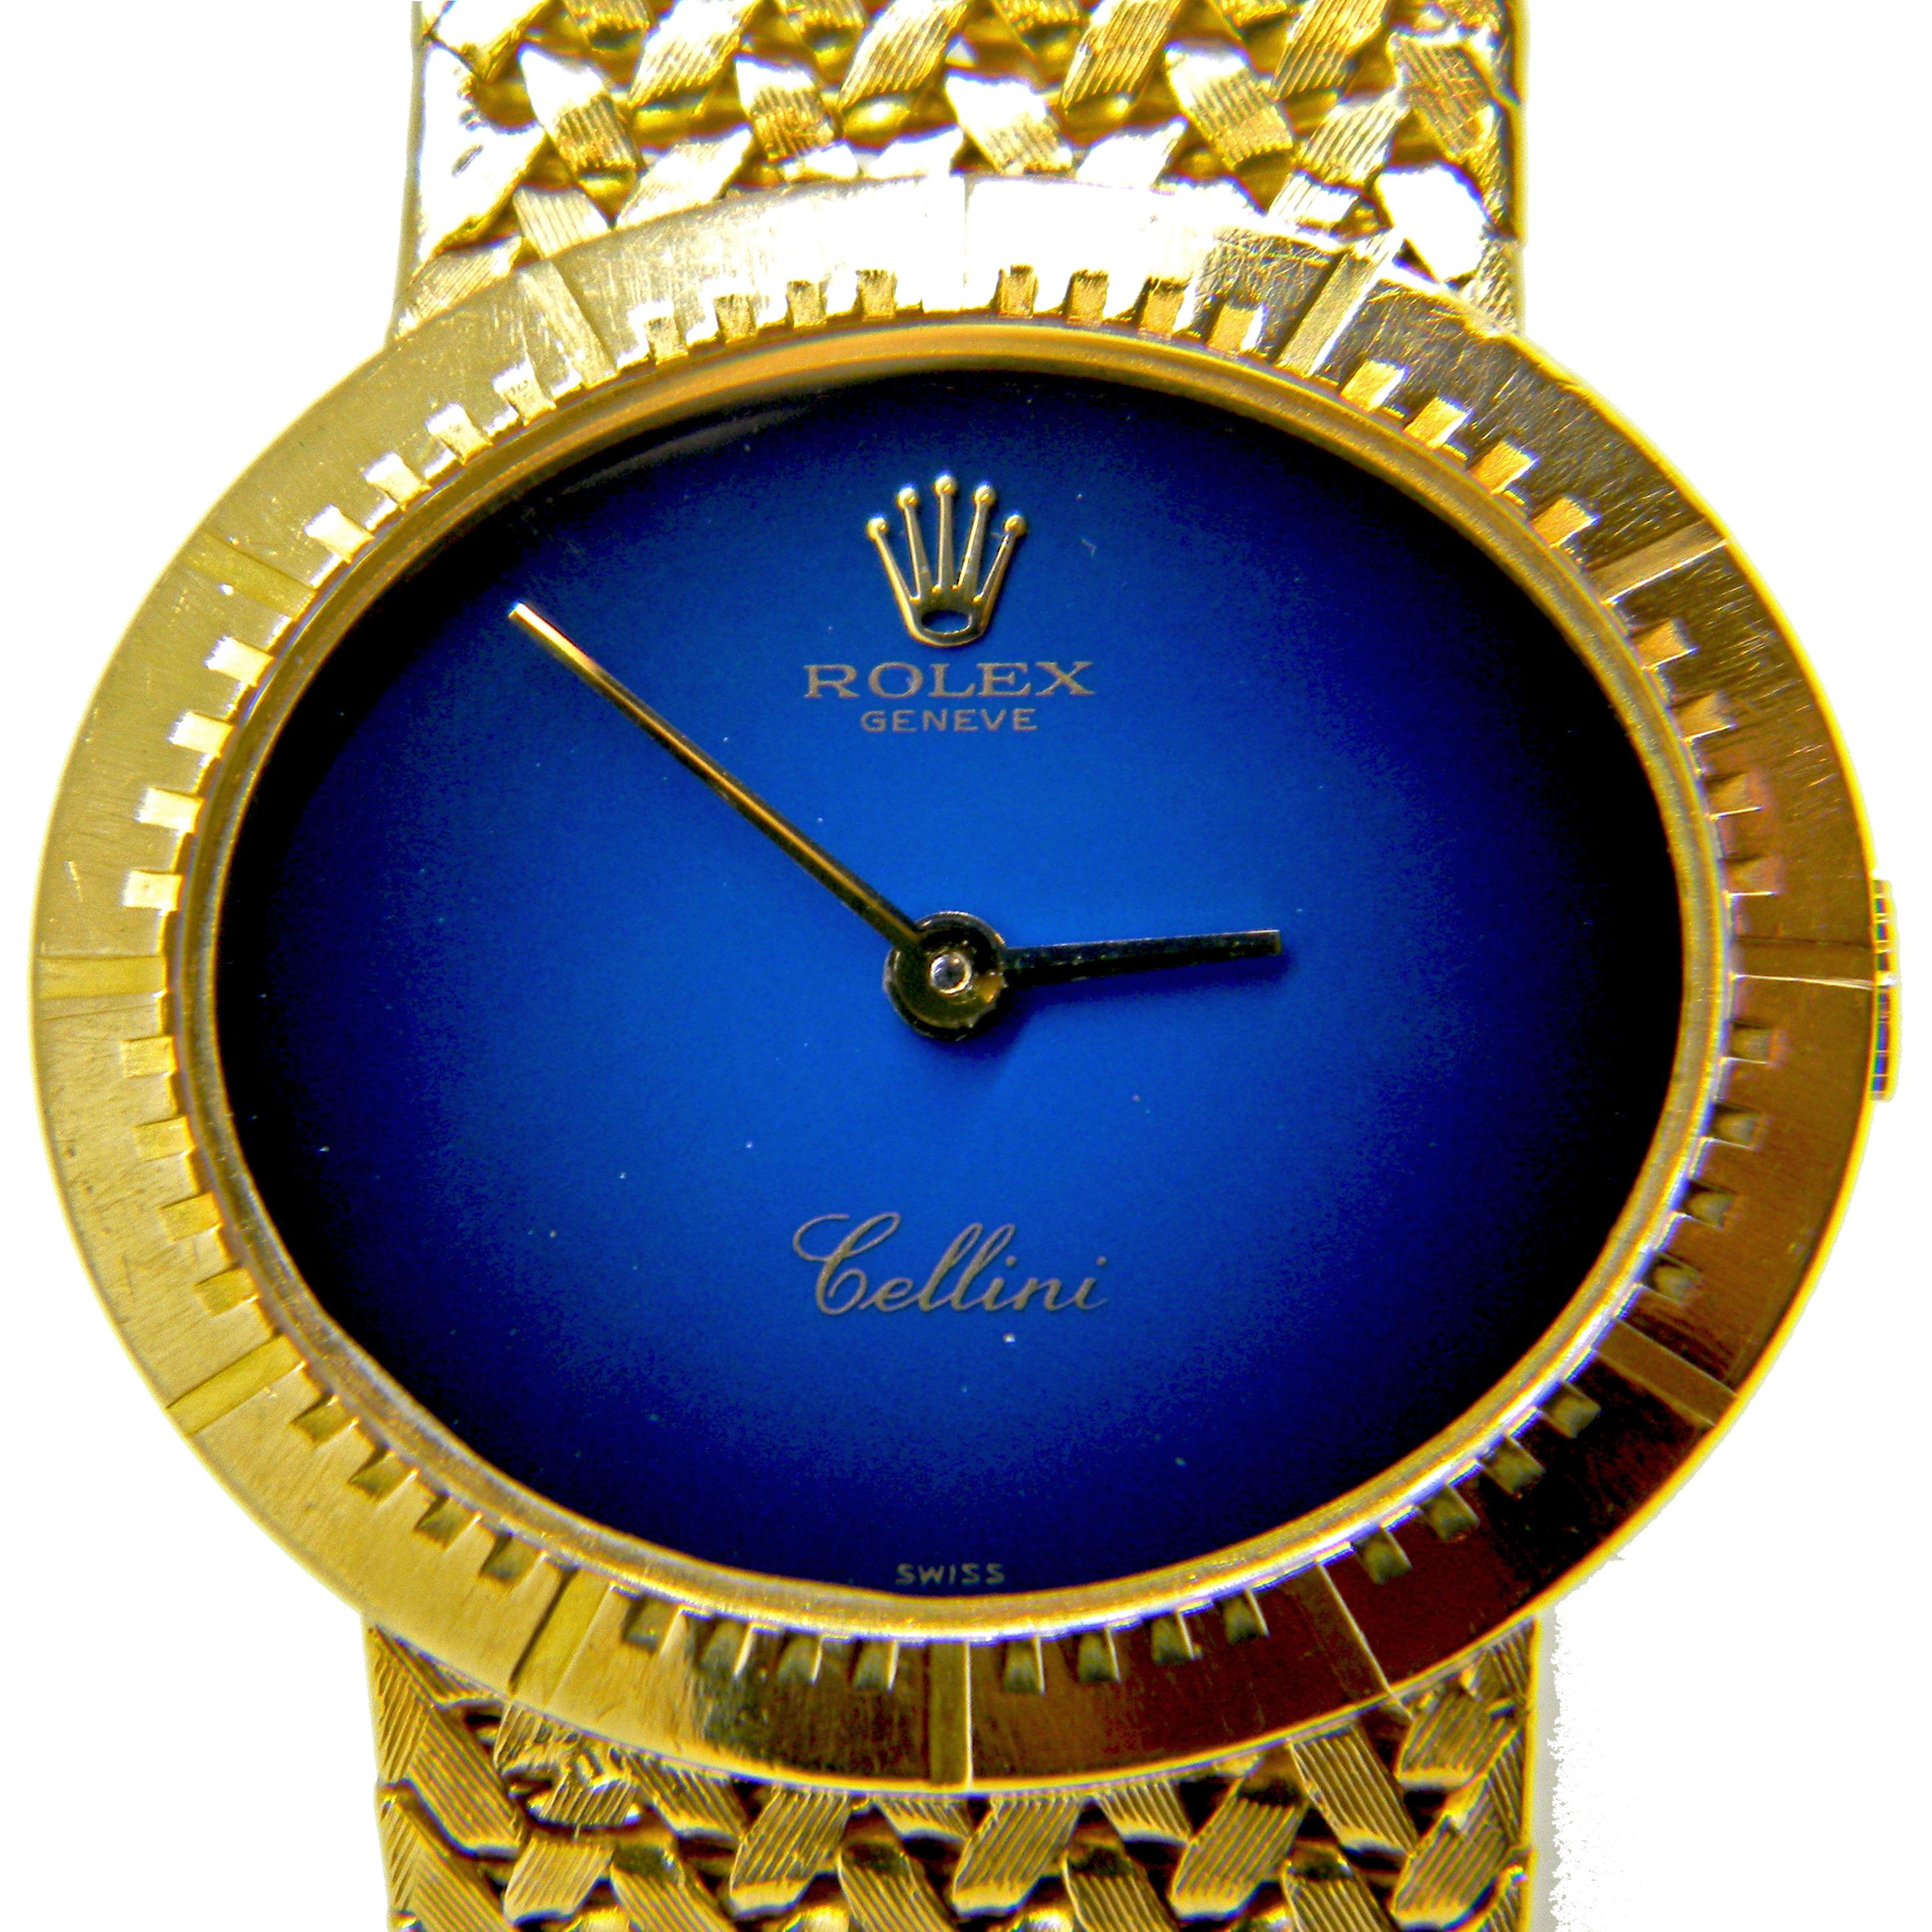 Ladies 1960's Rolex Cellini  18kt Gold Wrist Watch. 
Beautiful oval shaped case with integrated mesh band. 
Mechanical movement.
Blue degrade dial. 
Gold hands. 
Watch has been fully serviced by Rolex Australia including new glass and original